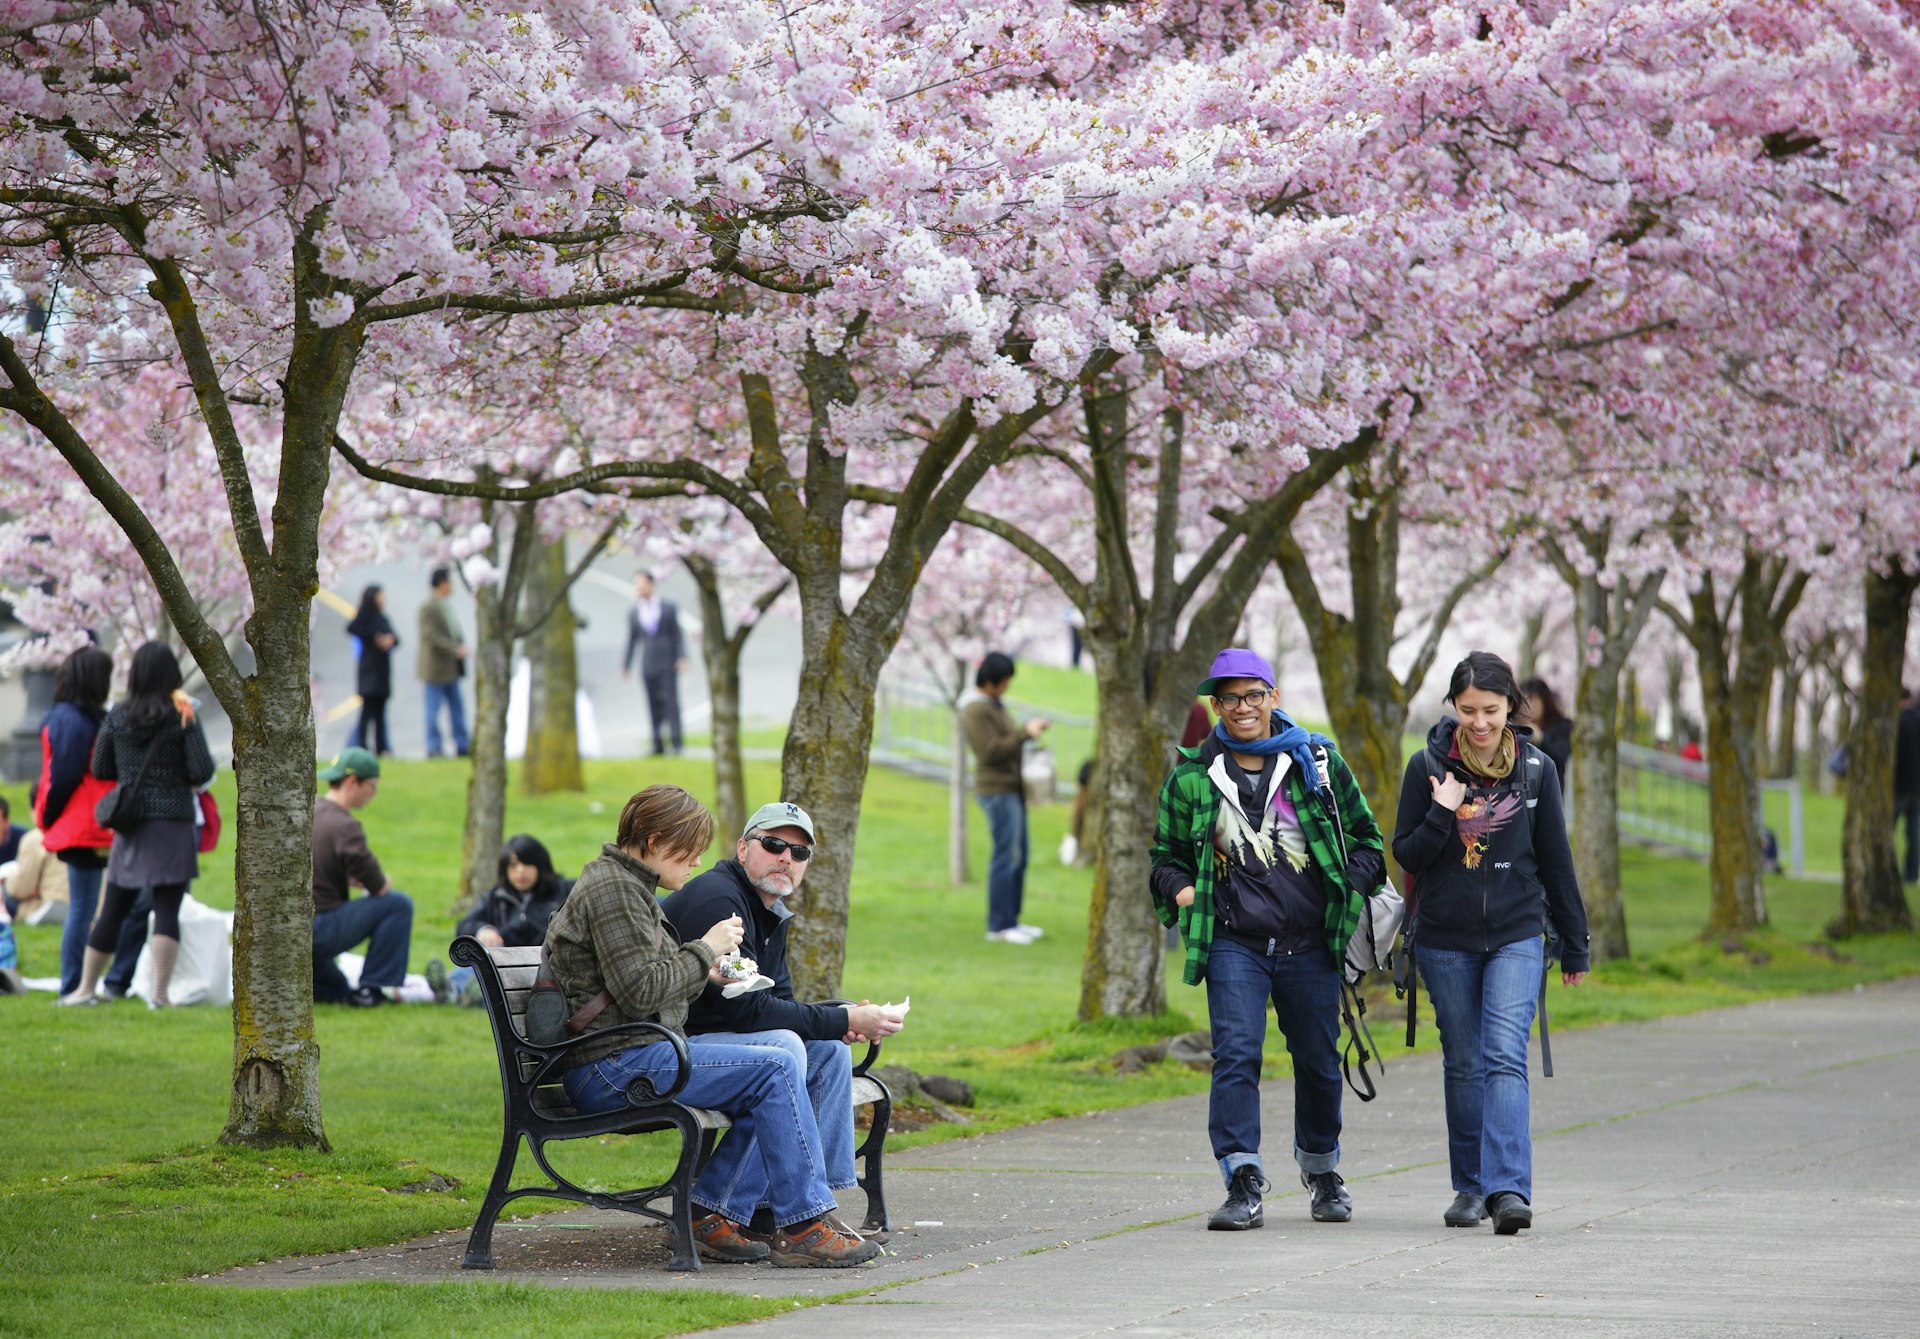 Cherry blossoms in full bloom at Tom McCall Waterfront Park in Portland, Oregon